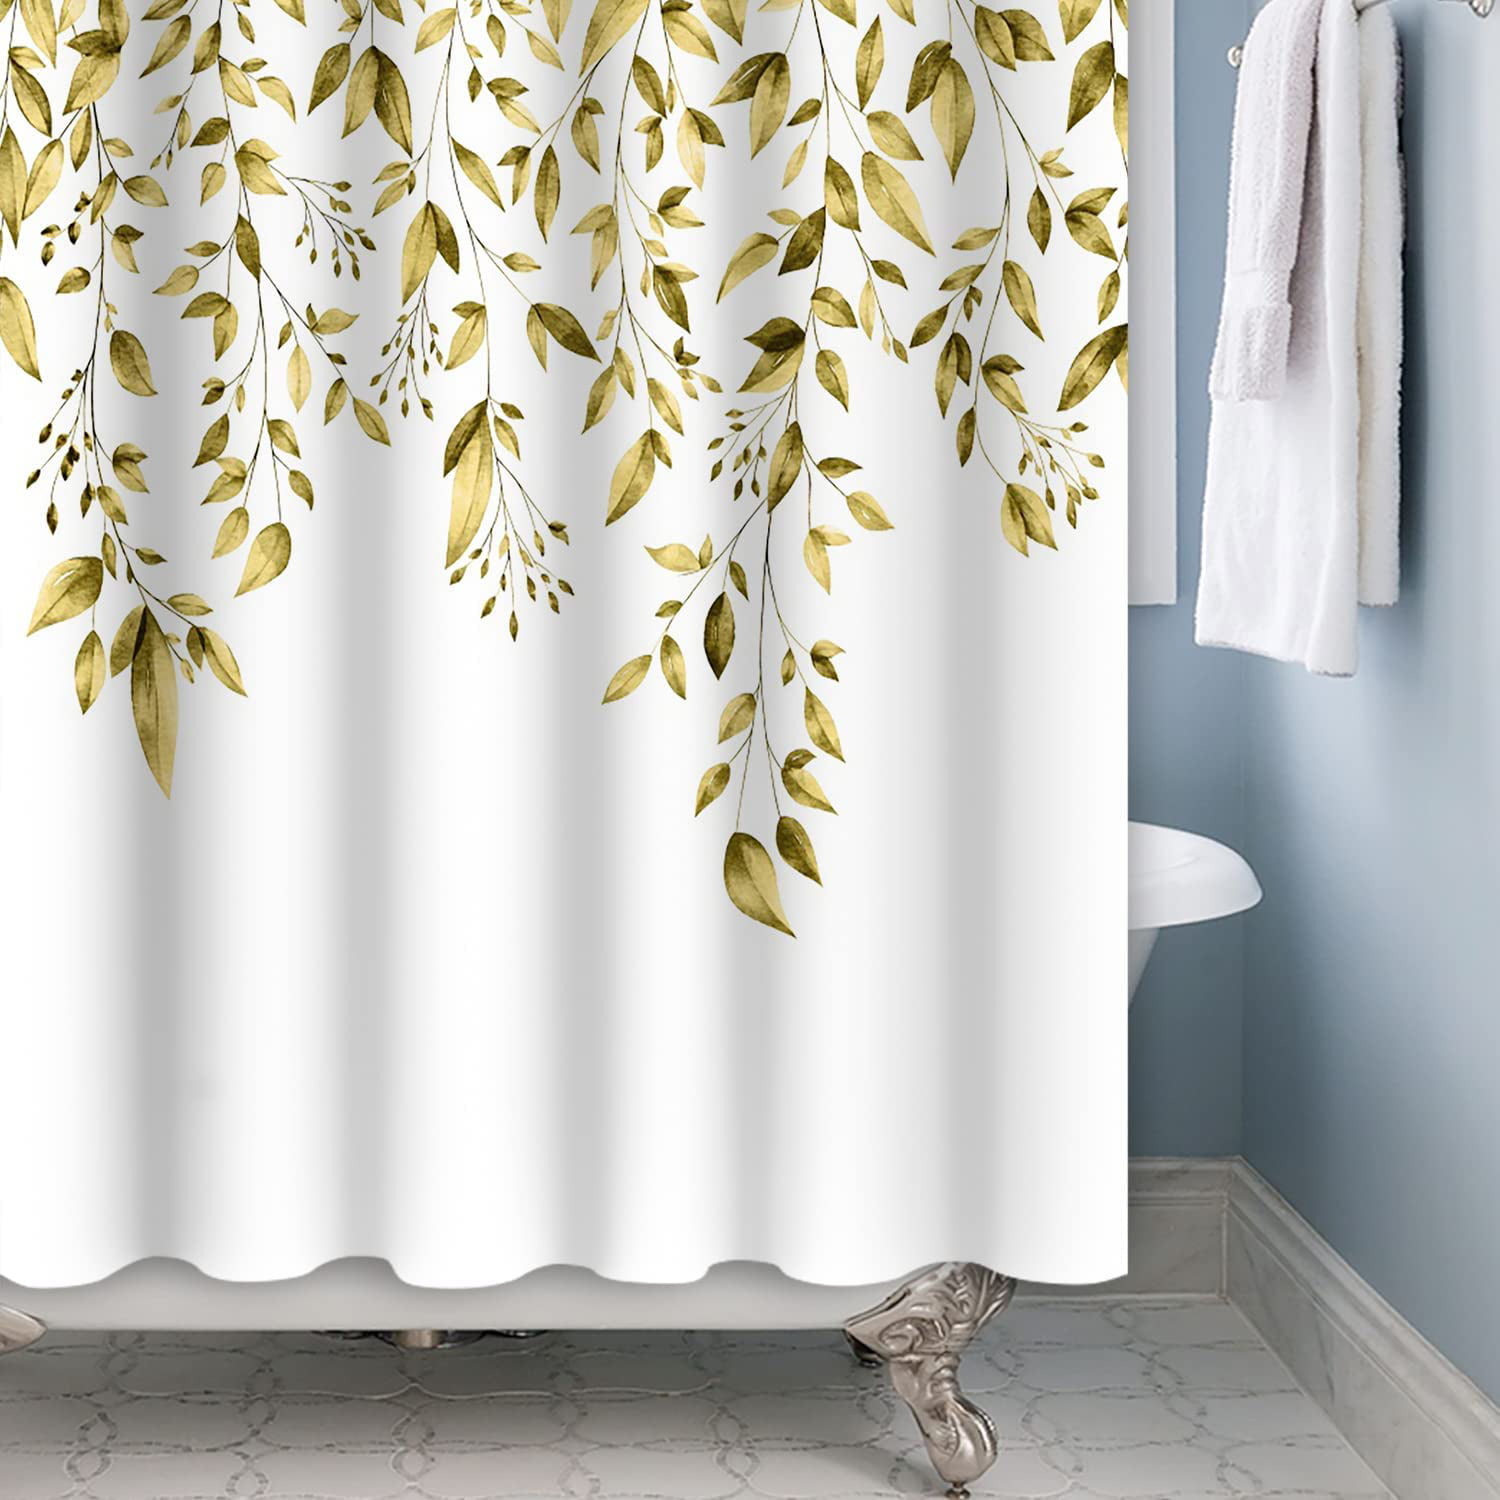 Shower Curtains, Gold Leaves Shower Curtain, 72 X 72 Fabric Shower Curtain  - Floral Plants Shower Curtain Natural Bathroom Decor Waterproof with 12  Hooks 